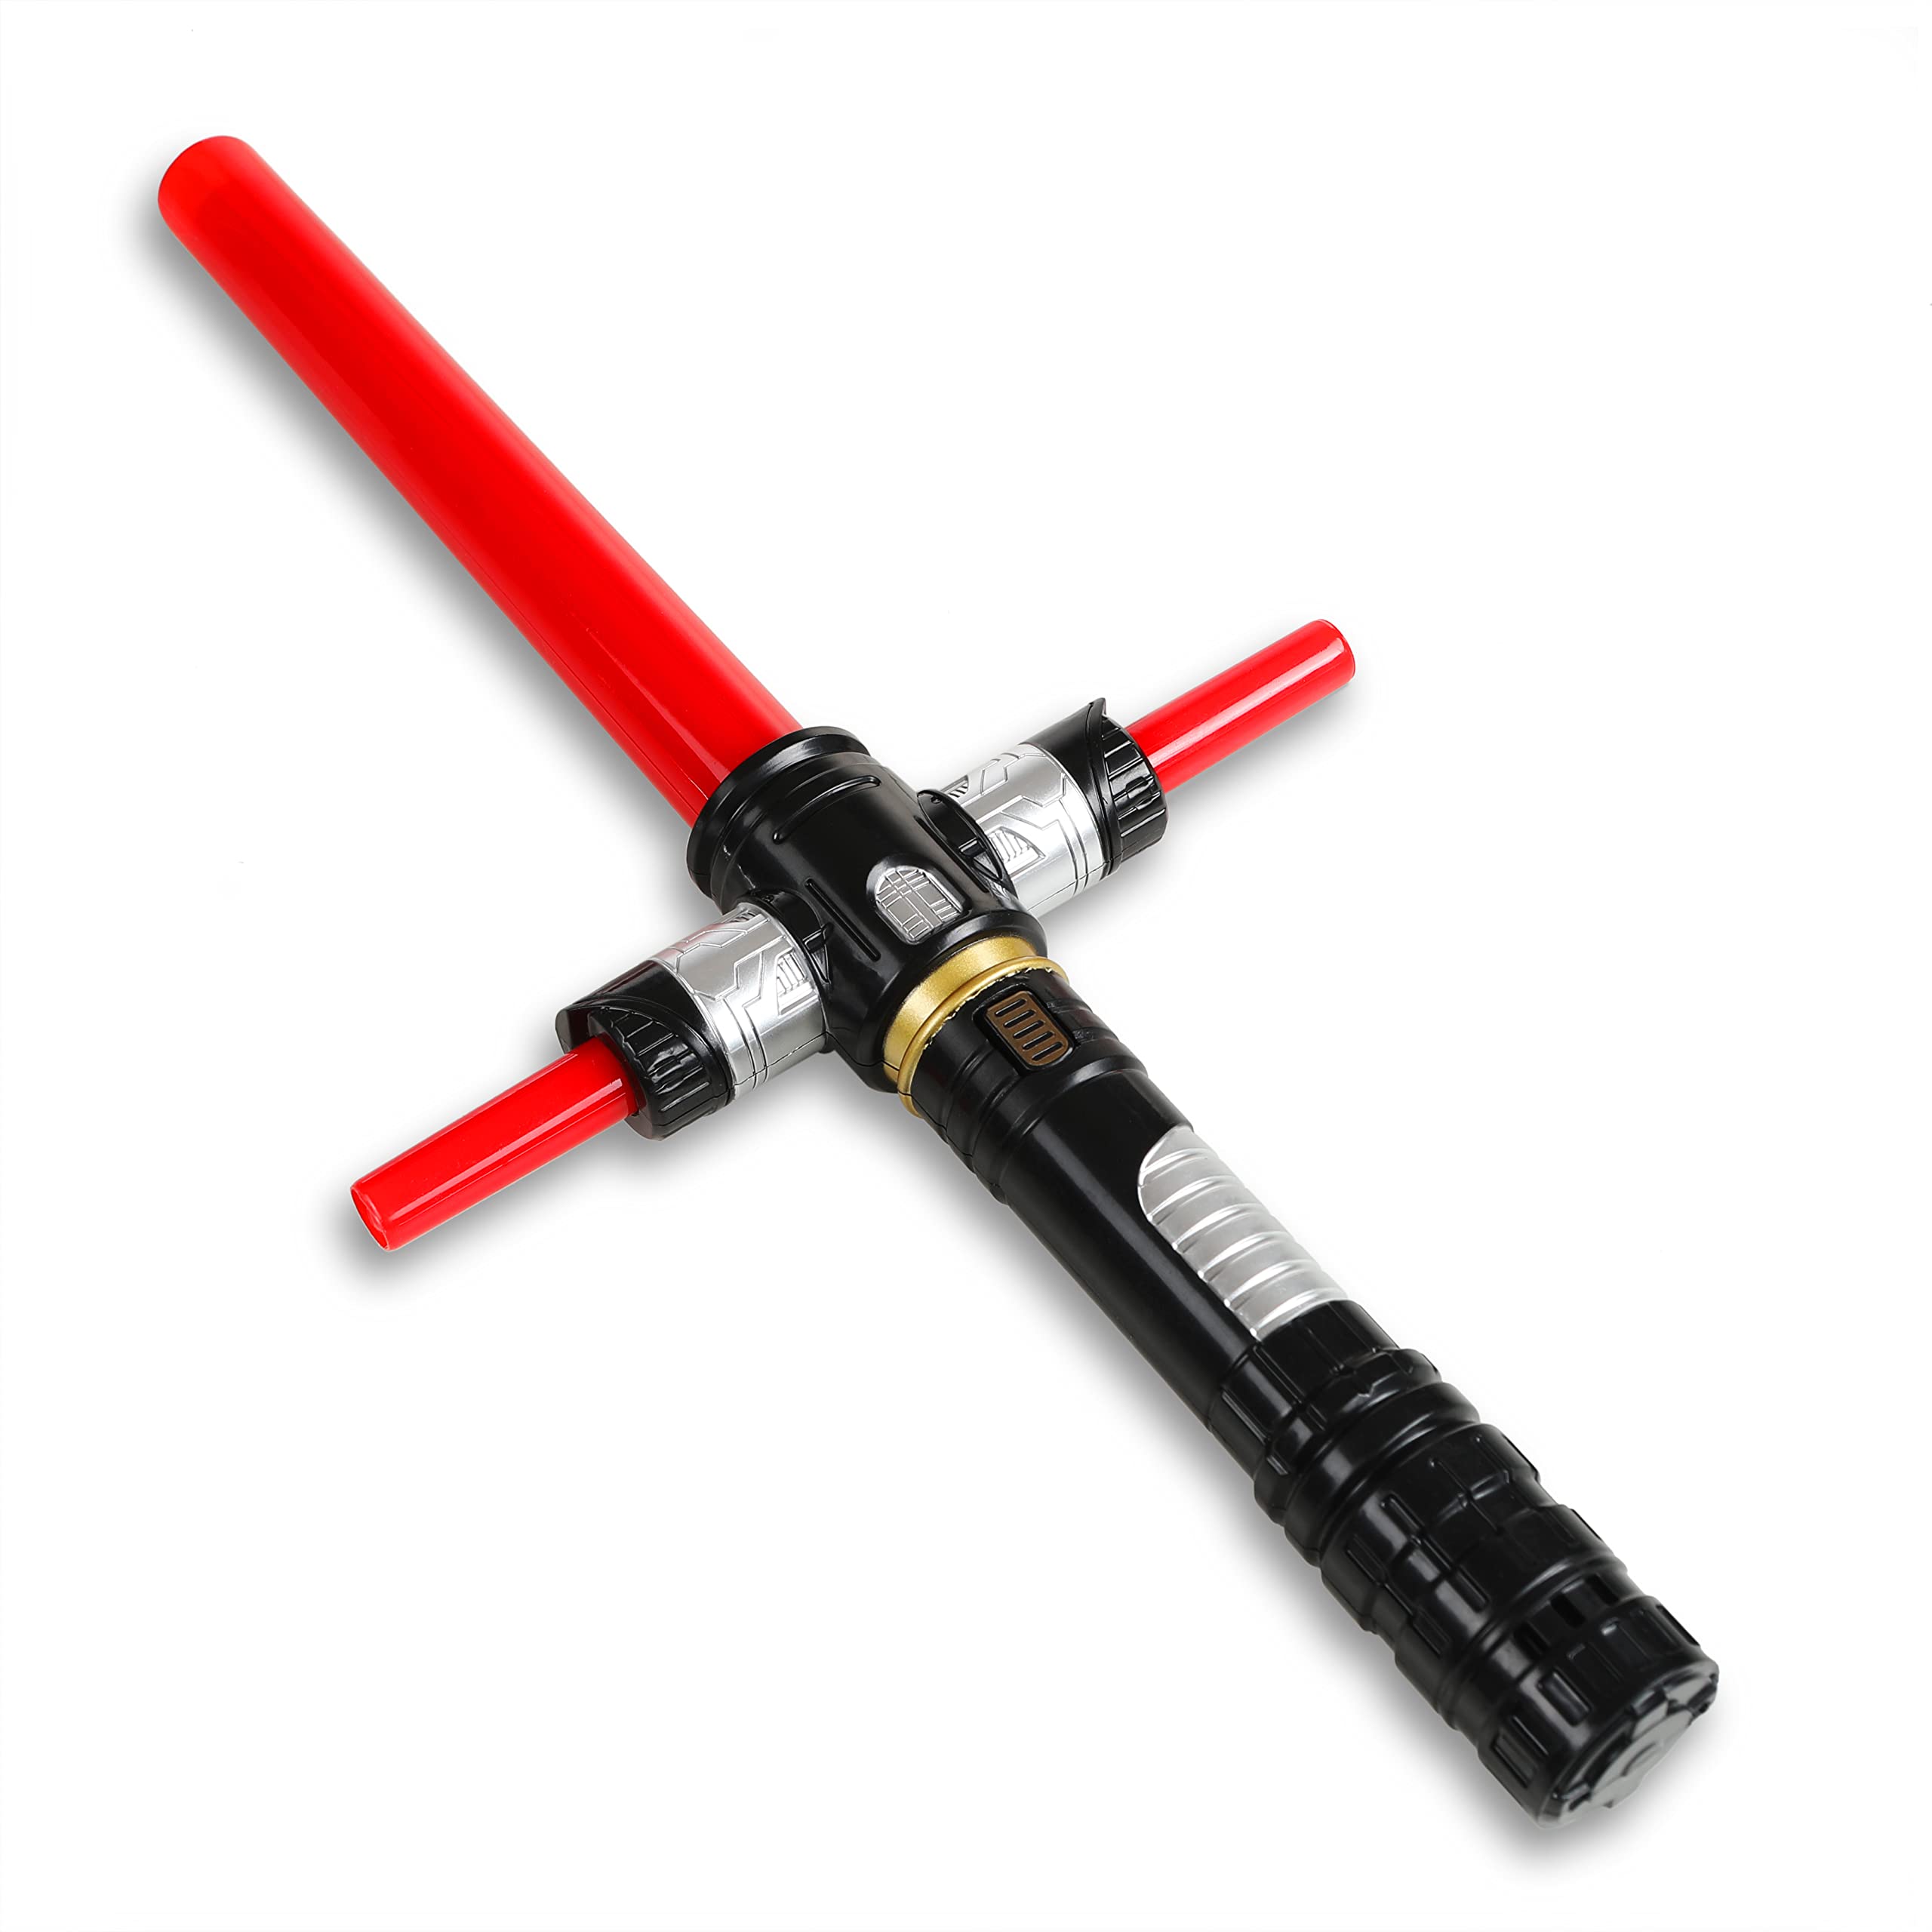 MewduMewdu Light up Saber Toy with Electronic Lights and Sound Effect for Kids and Adults, Red LED Retractable Force FX Saber Sword Toy as Party, Holiday, Birthday Gift